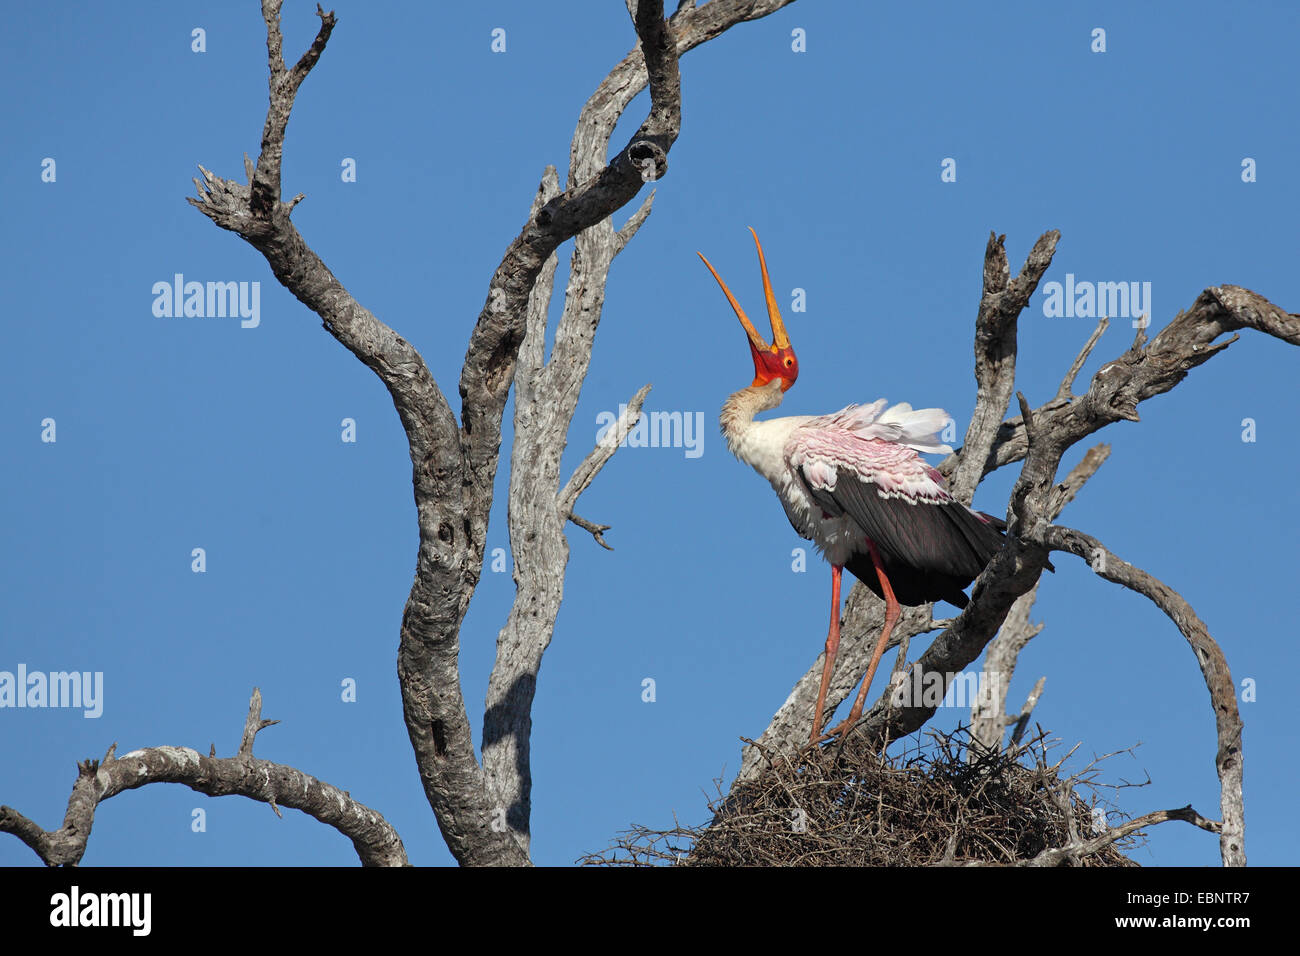 yellow-billed stork (Mycteria ibis), standing on a dead tree and calling, South Africa, Kruger National Park Stock Photo